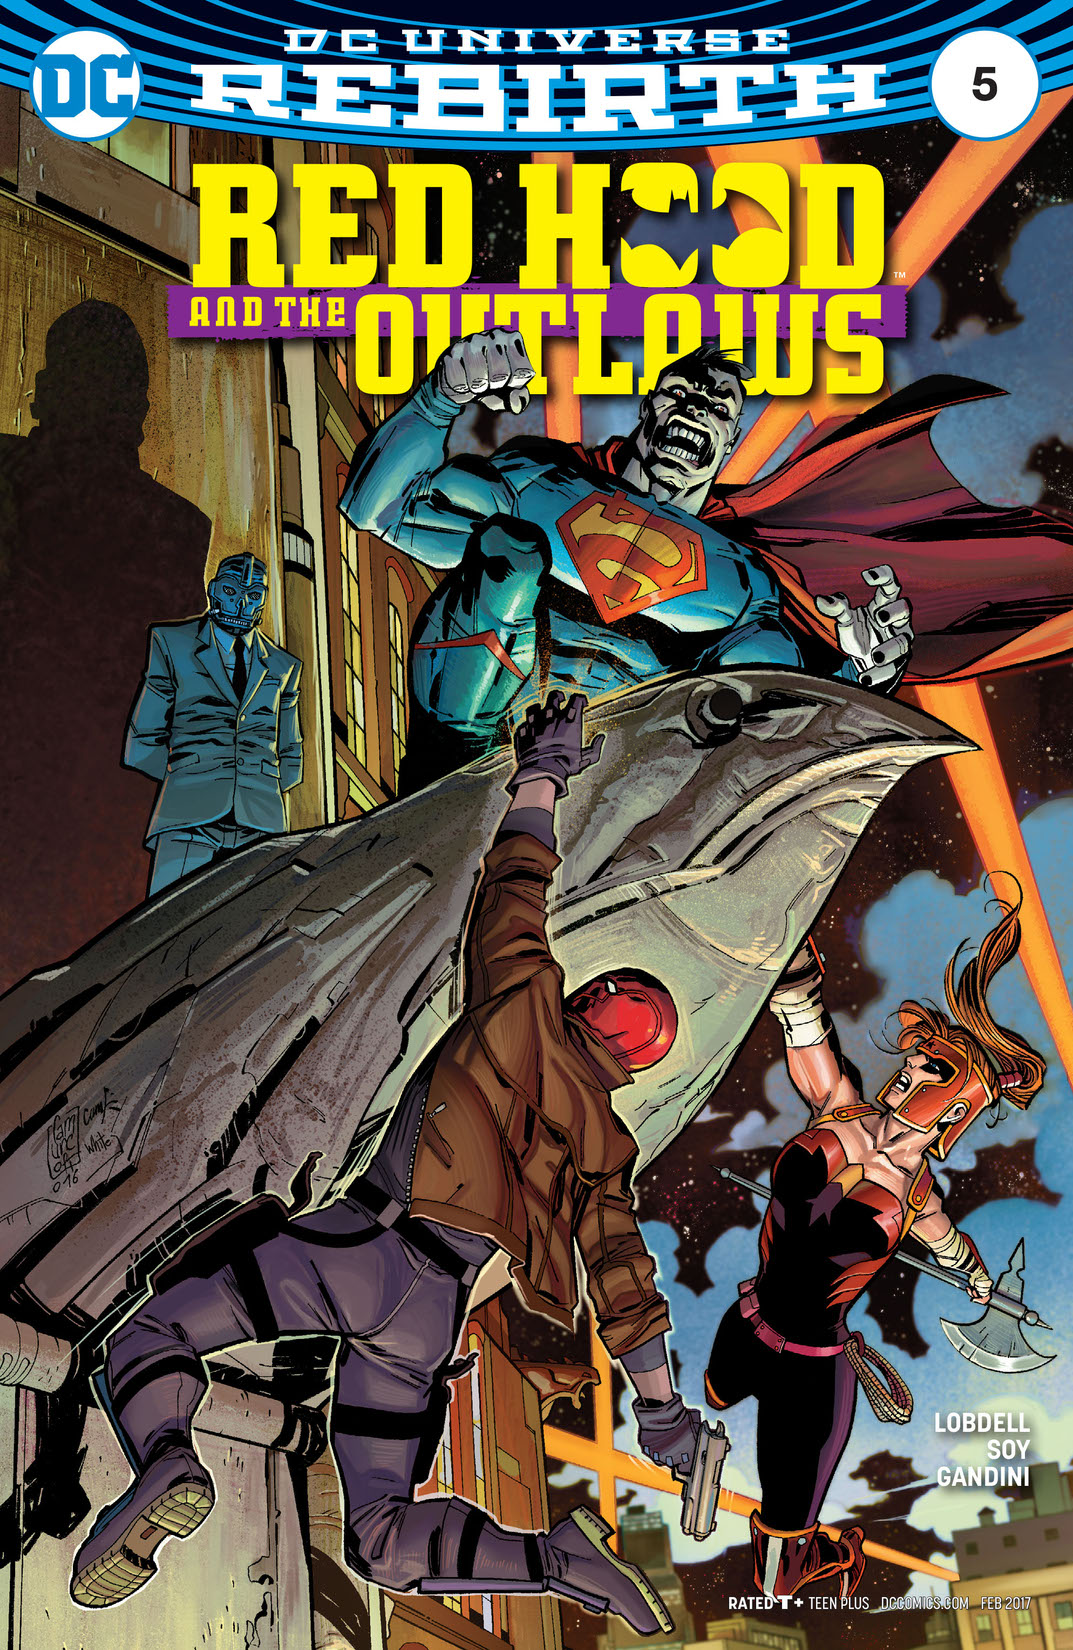 Red Hood and the Outlaws (2016-) #5 preview images